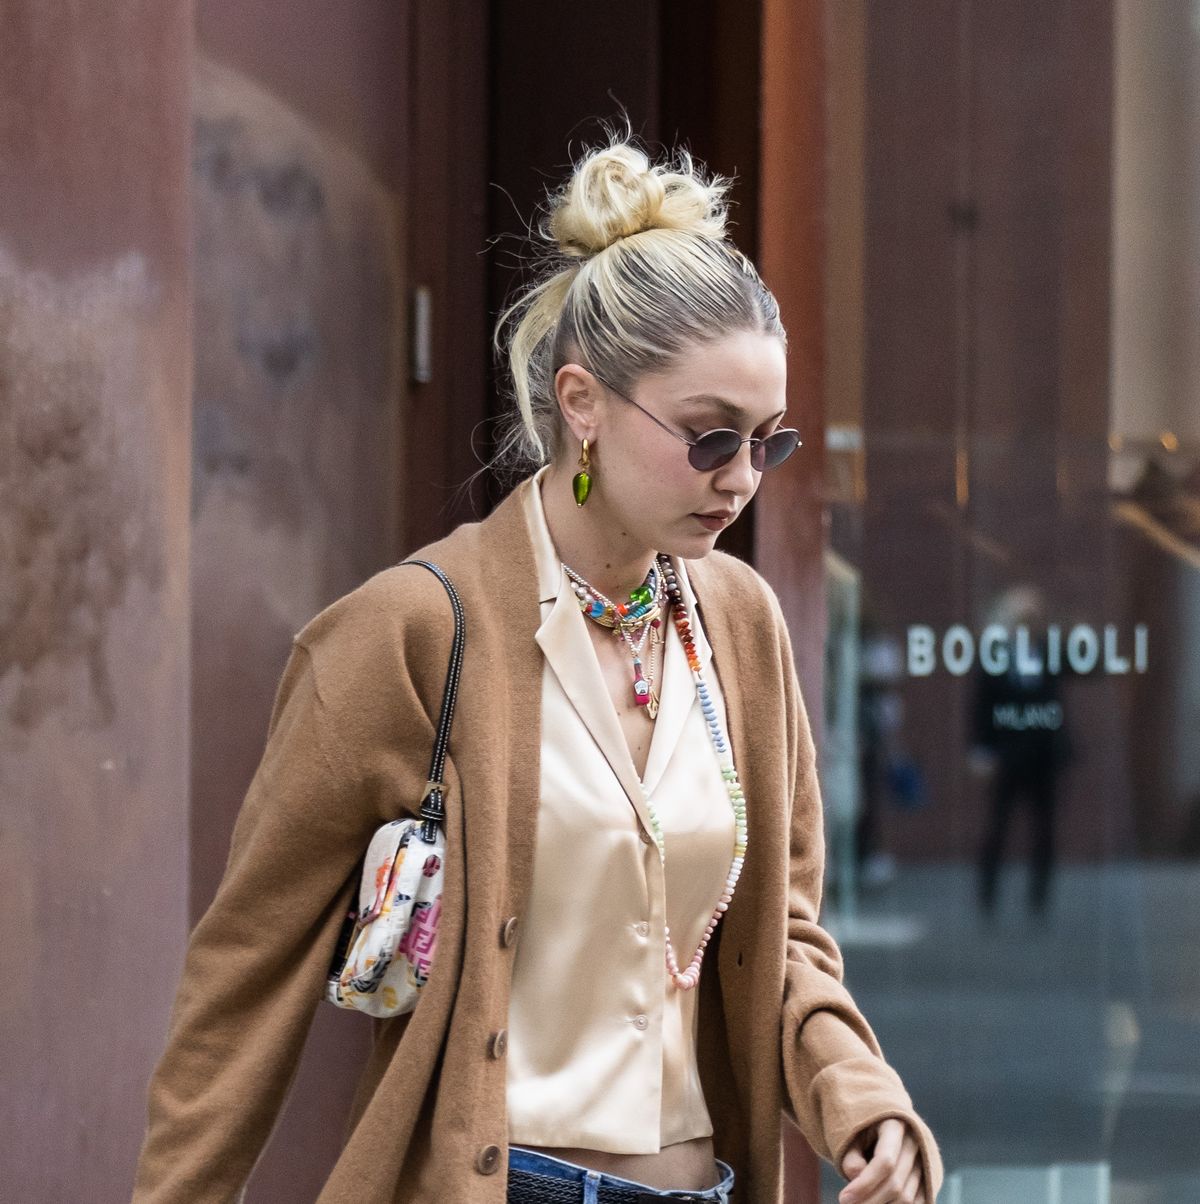 Gigi Hadid Wears a Cozy Cardigan and Colorful Accessories in NYC